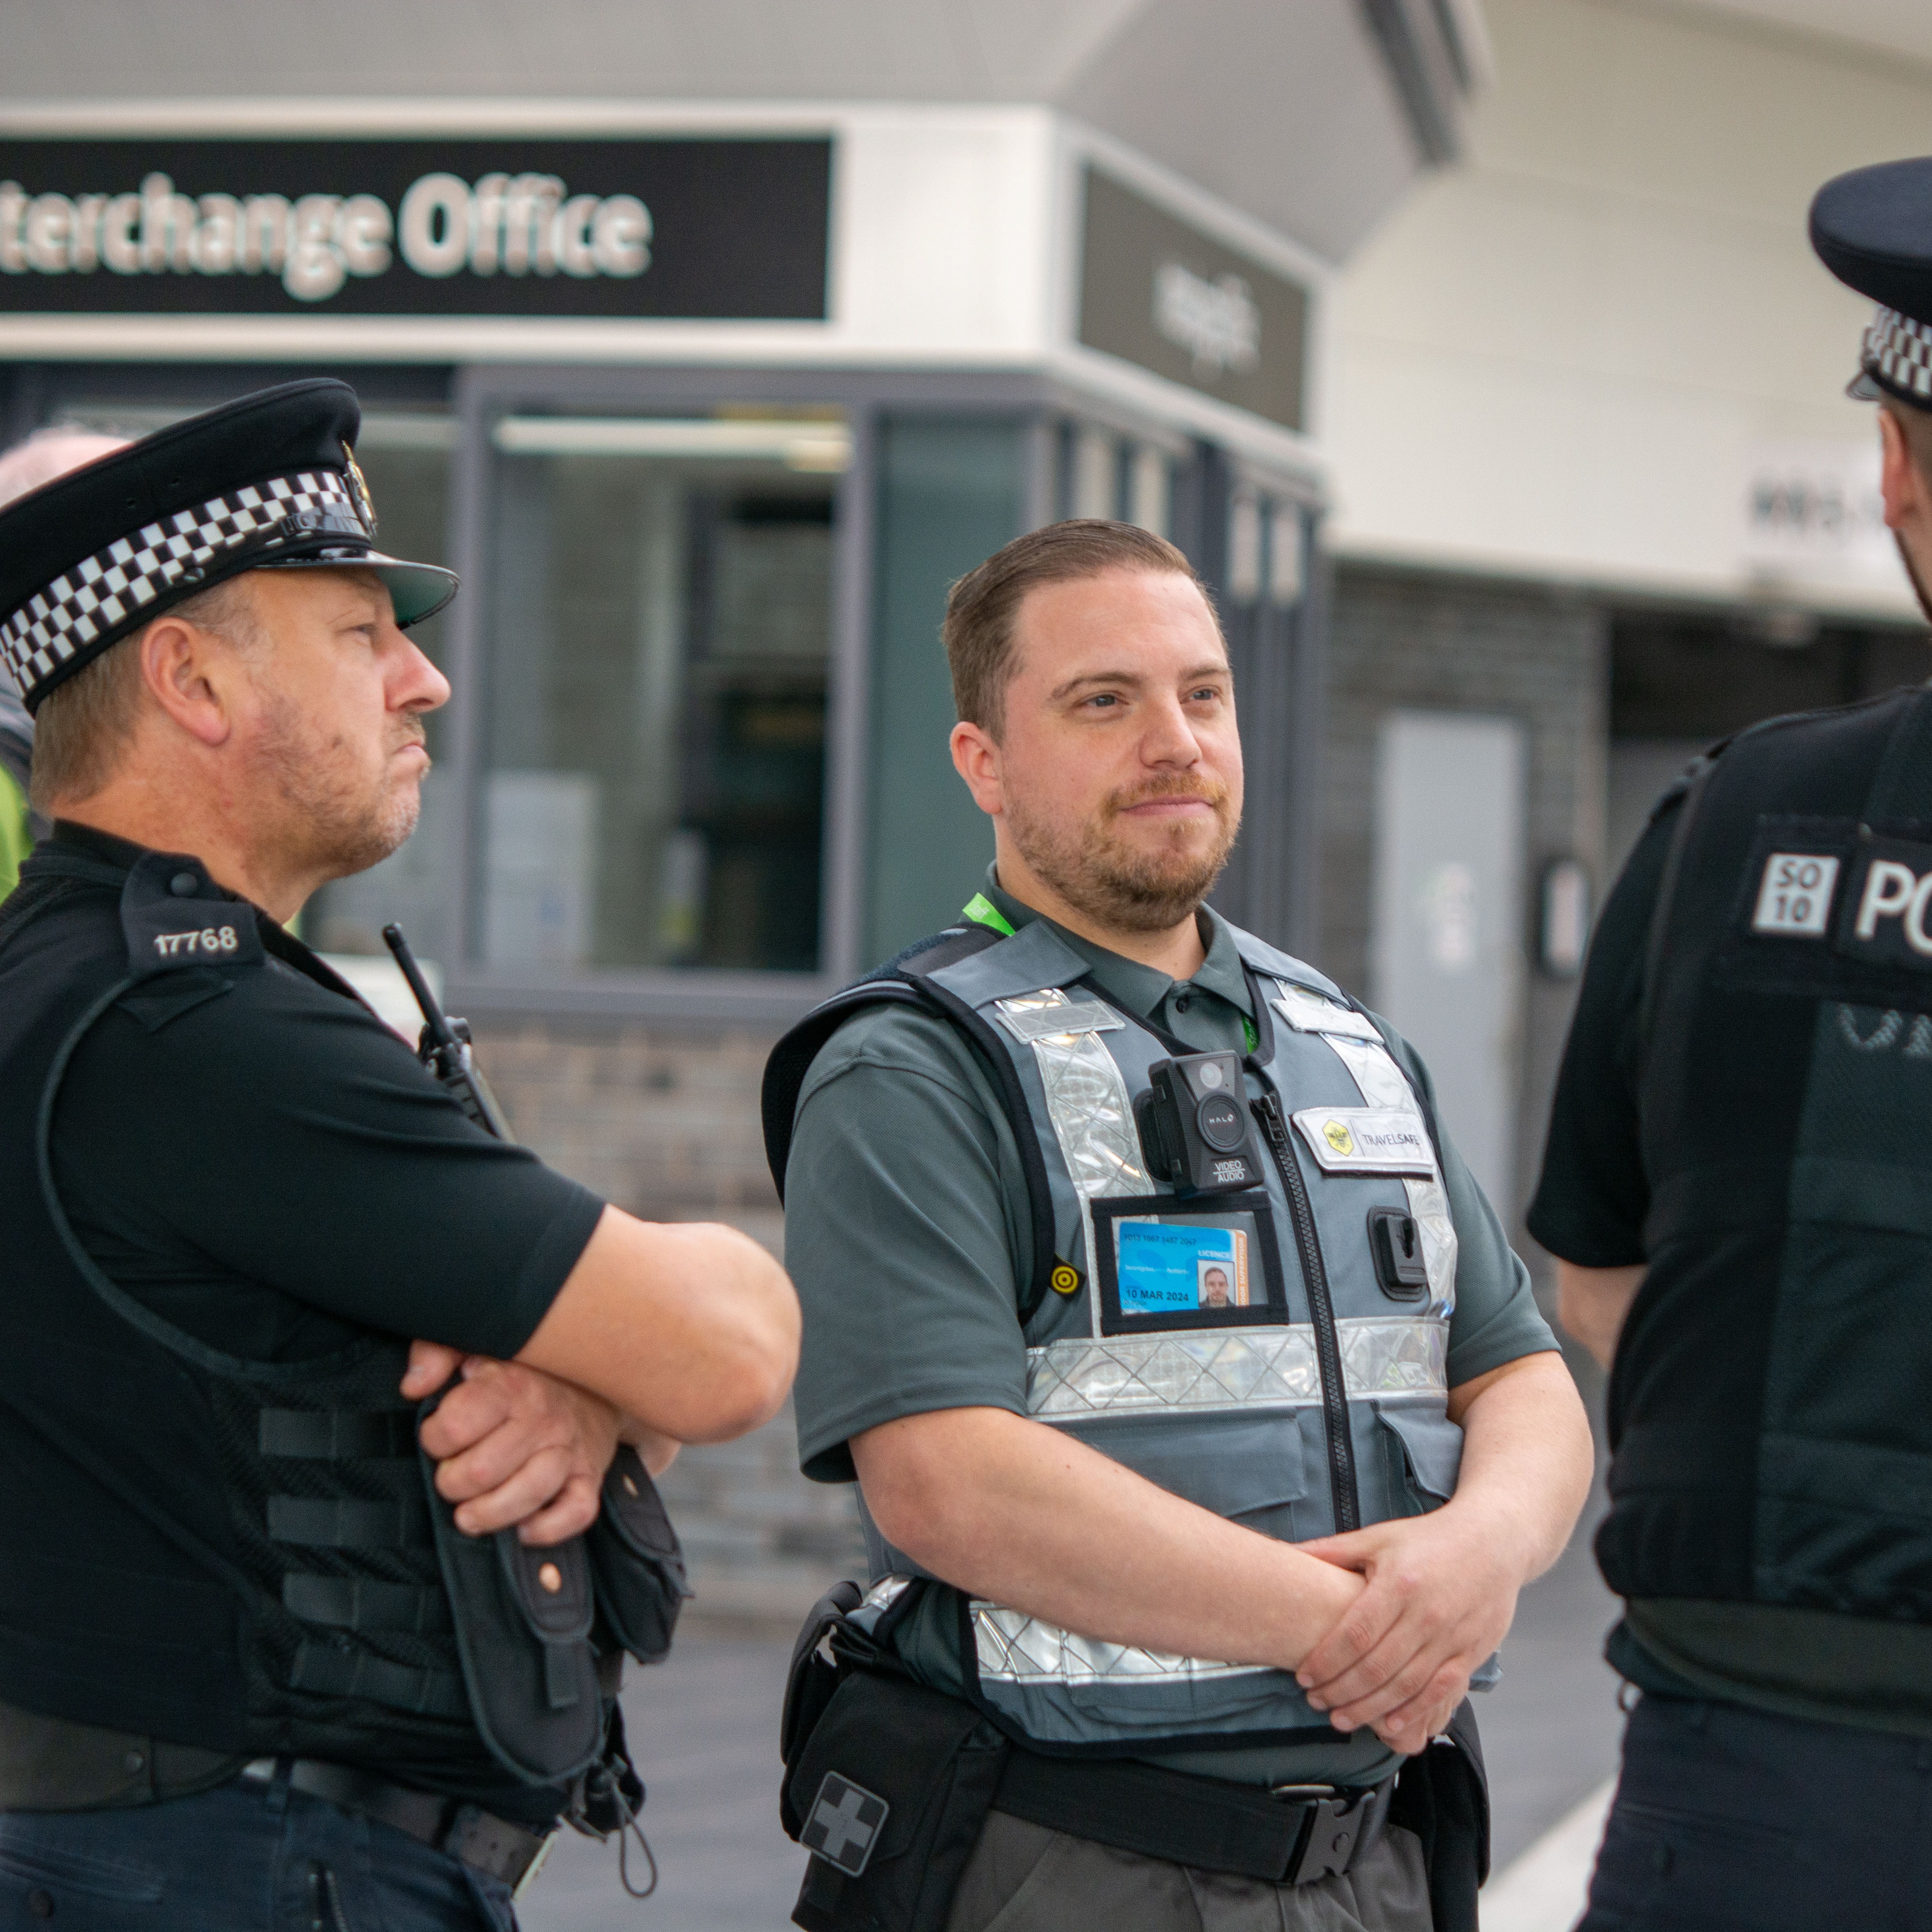 Travelsafe officer with two police officers at Bolton interchange